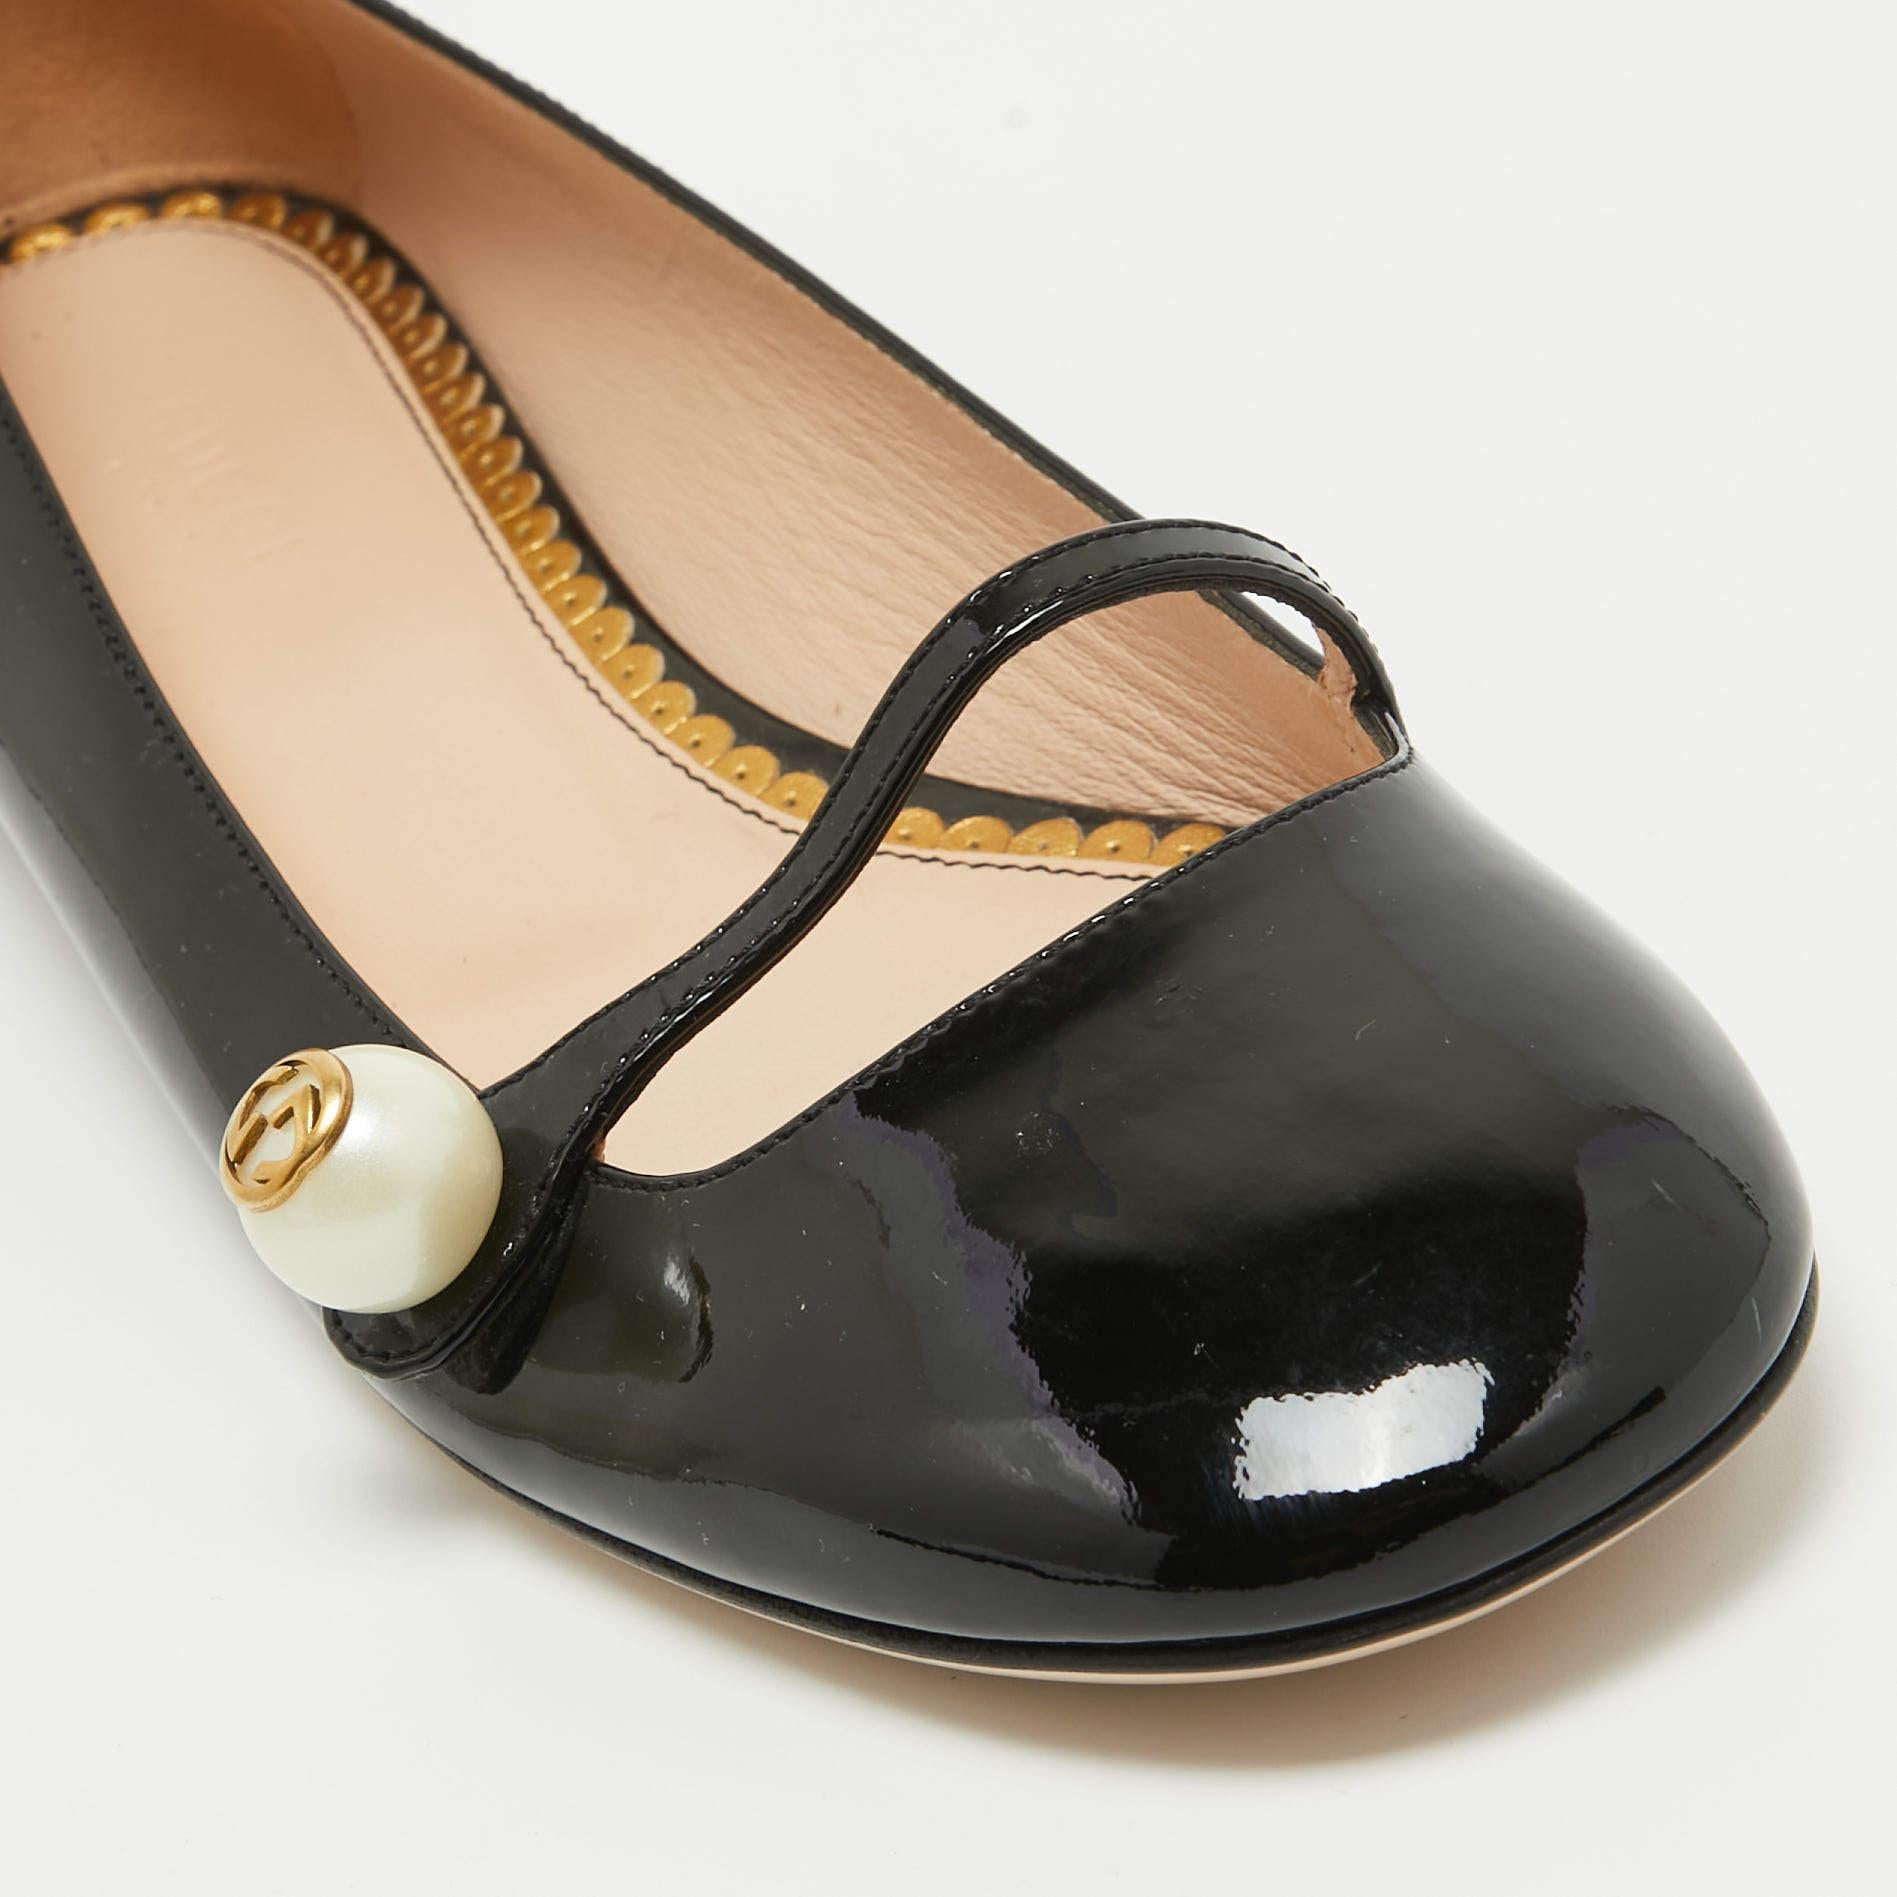 Created by Gucci, these ballet flats are a staple style every shoe collection needs. Constructed using patent leather, the shoes are highlighted by a GG pearl on the exterior.

